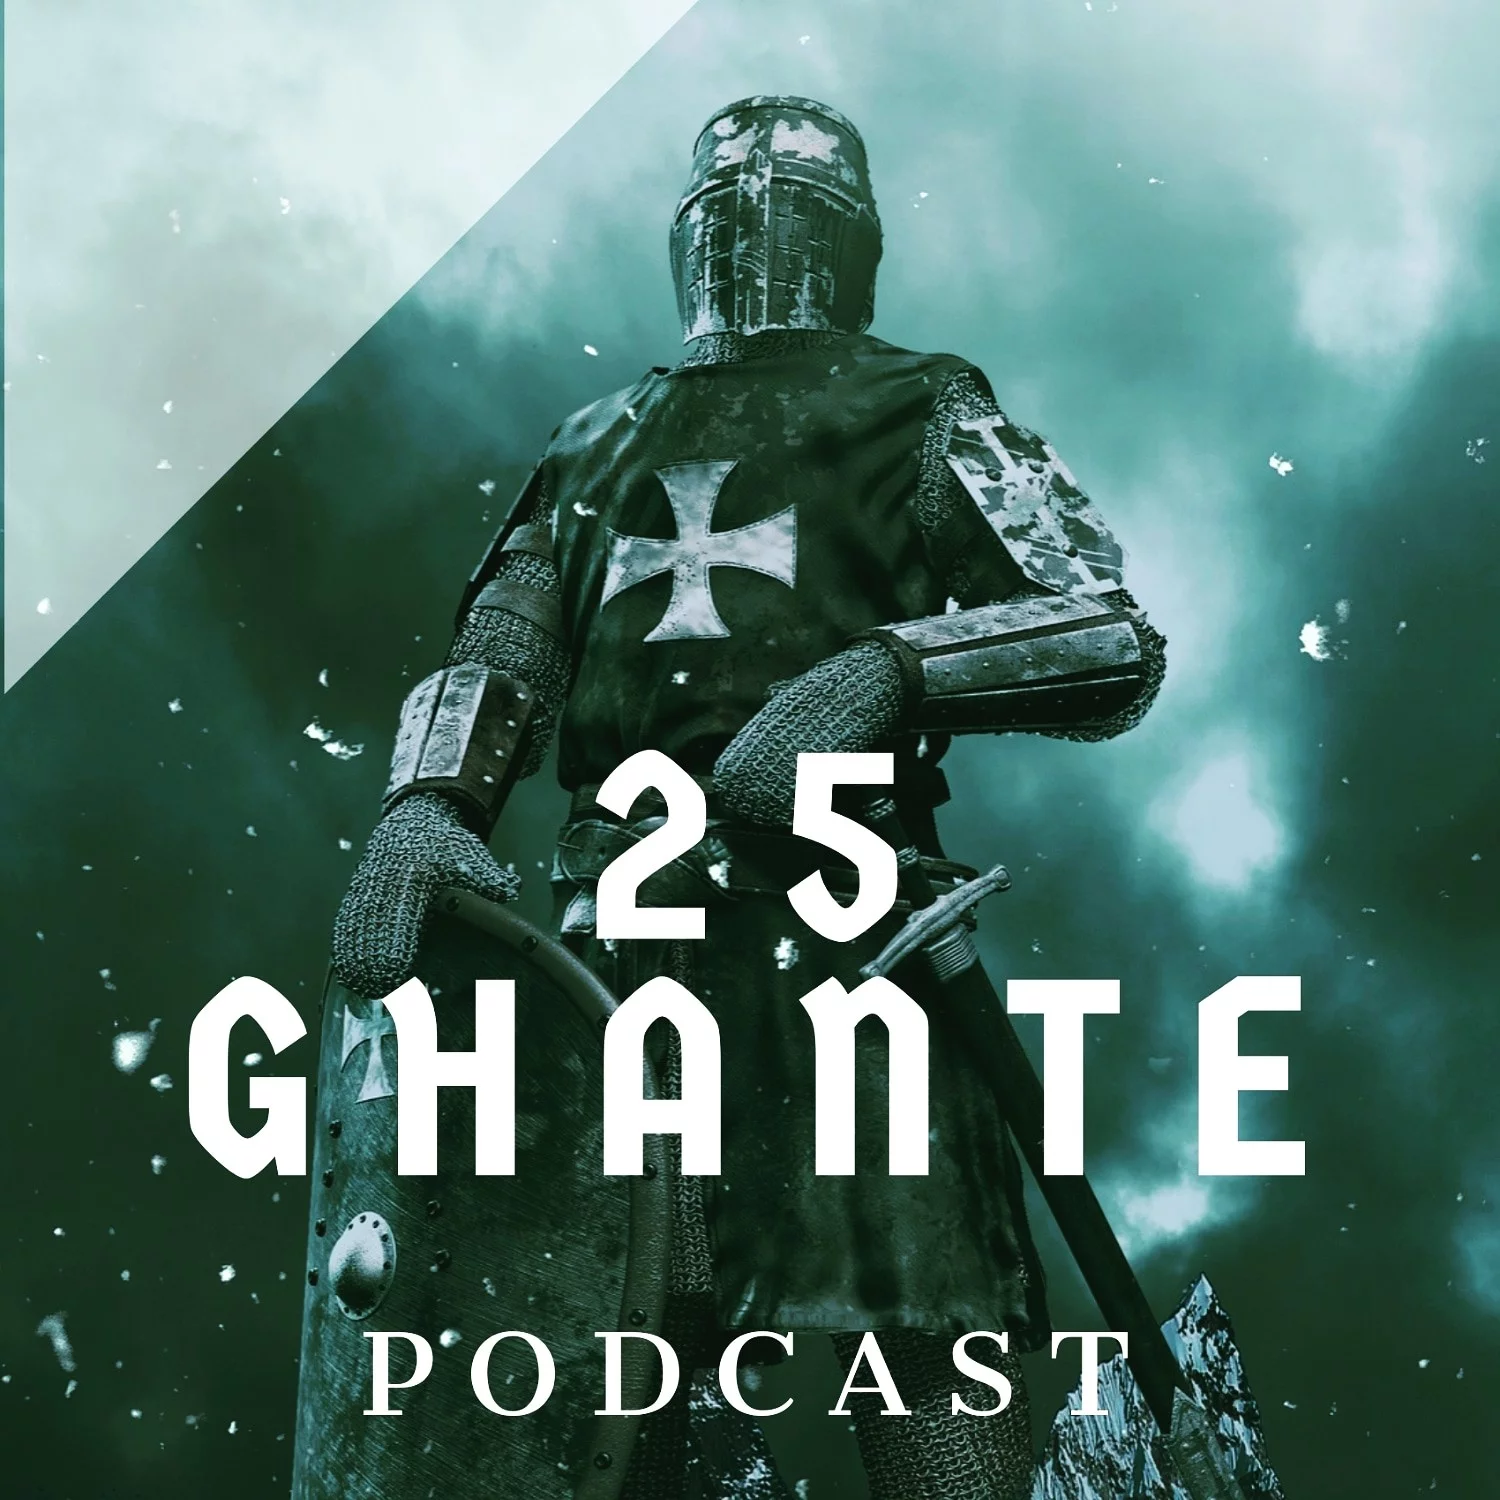 Introduction- 25 ghante The Podcast